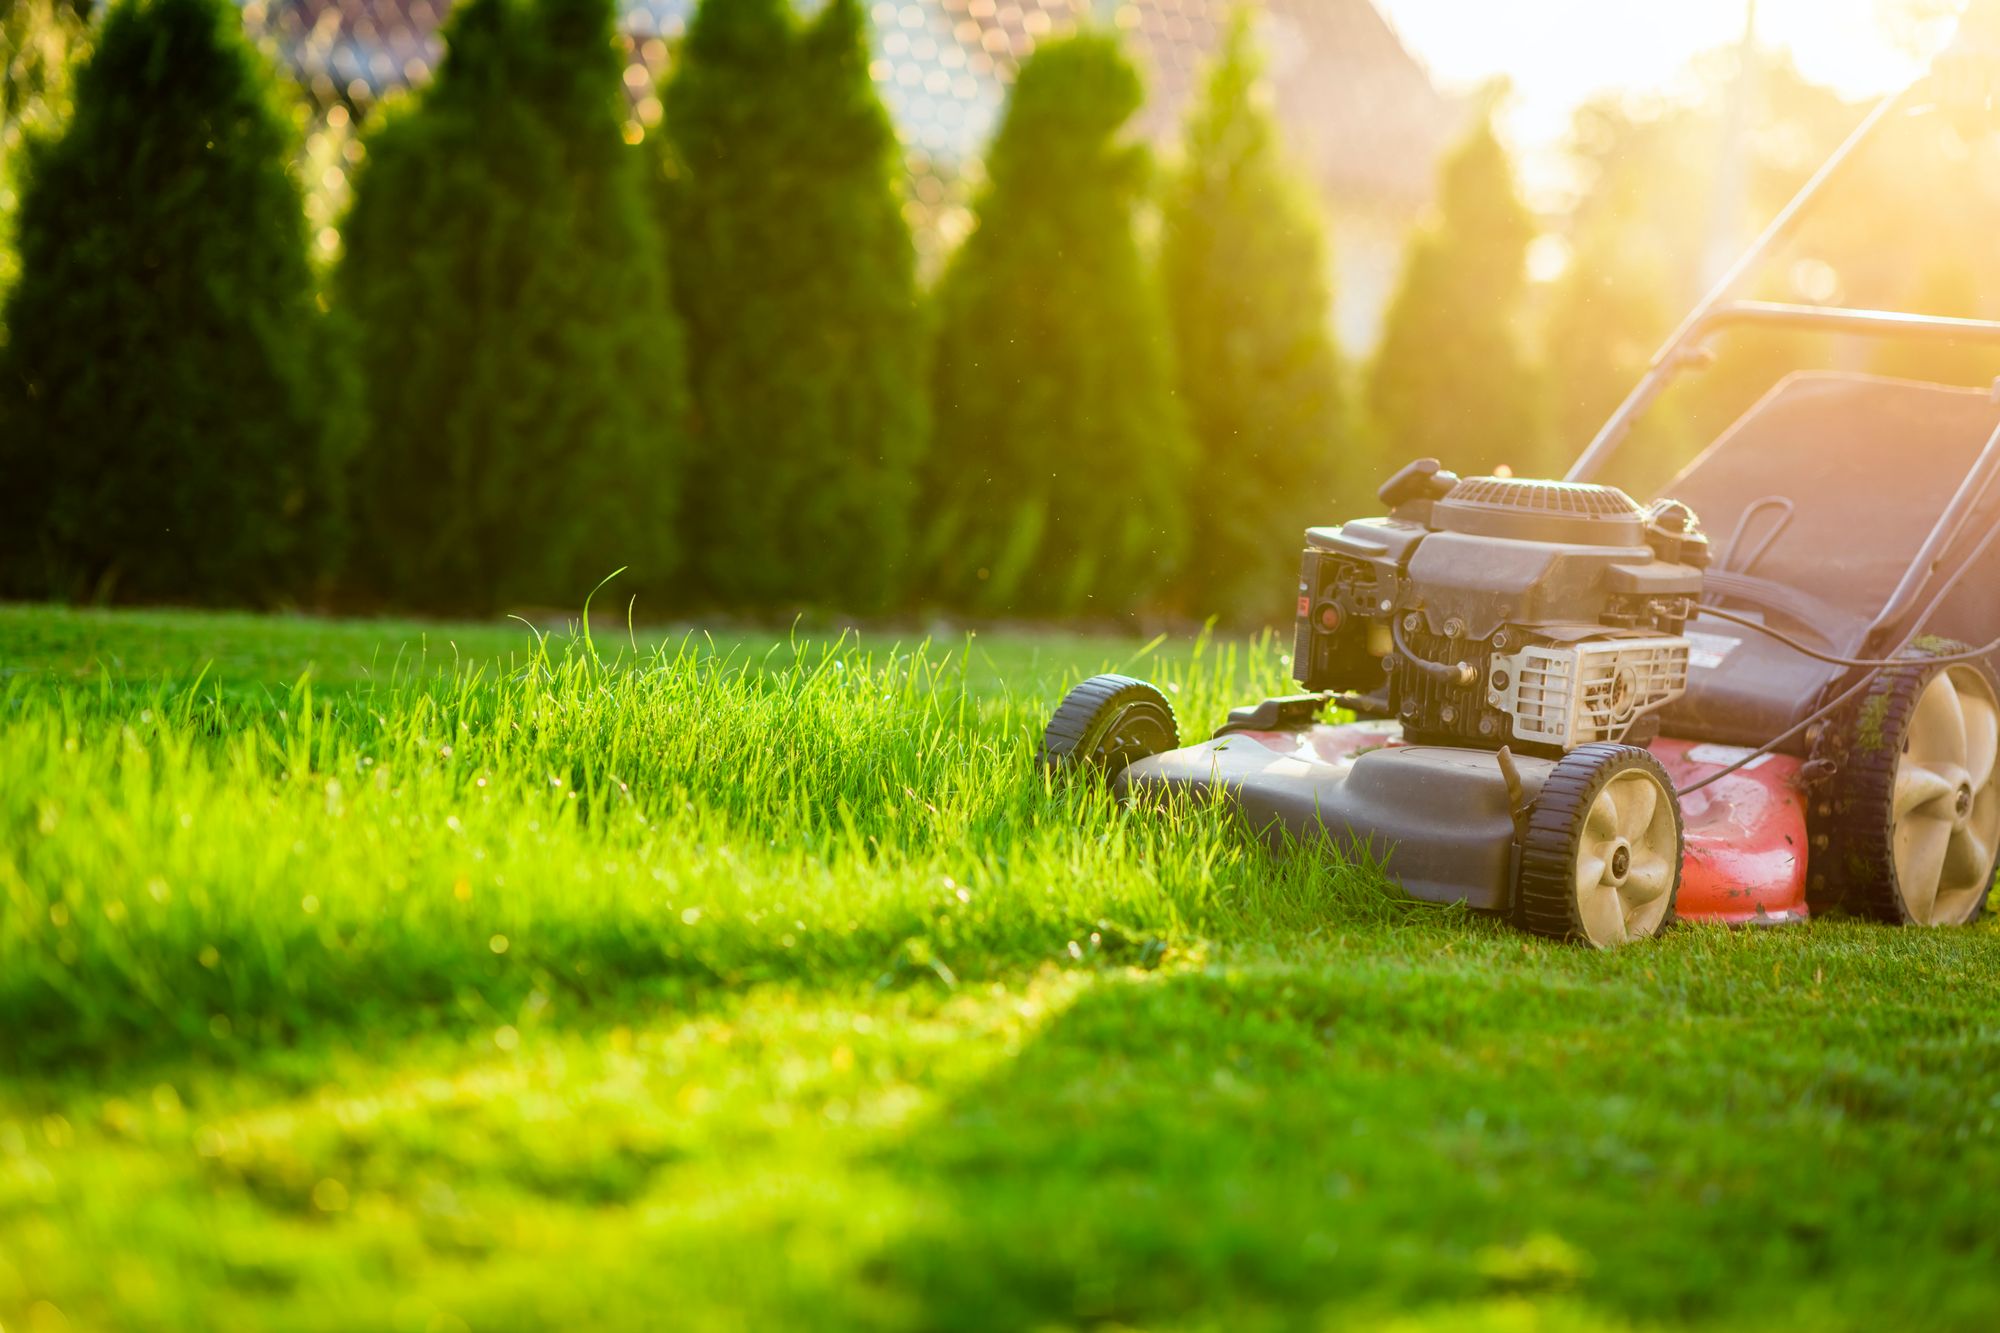 Mow your lawn or not? That’s the debate for May